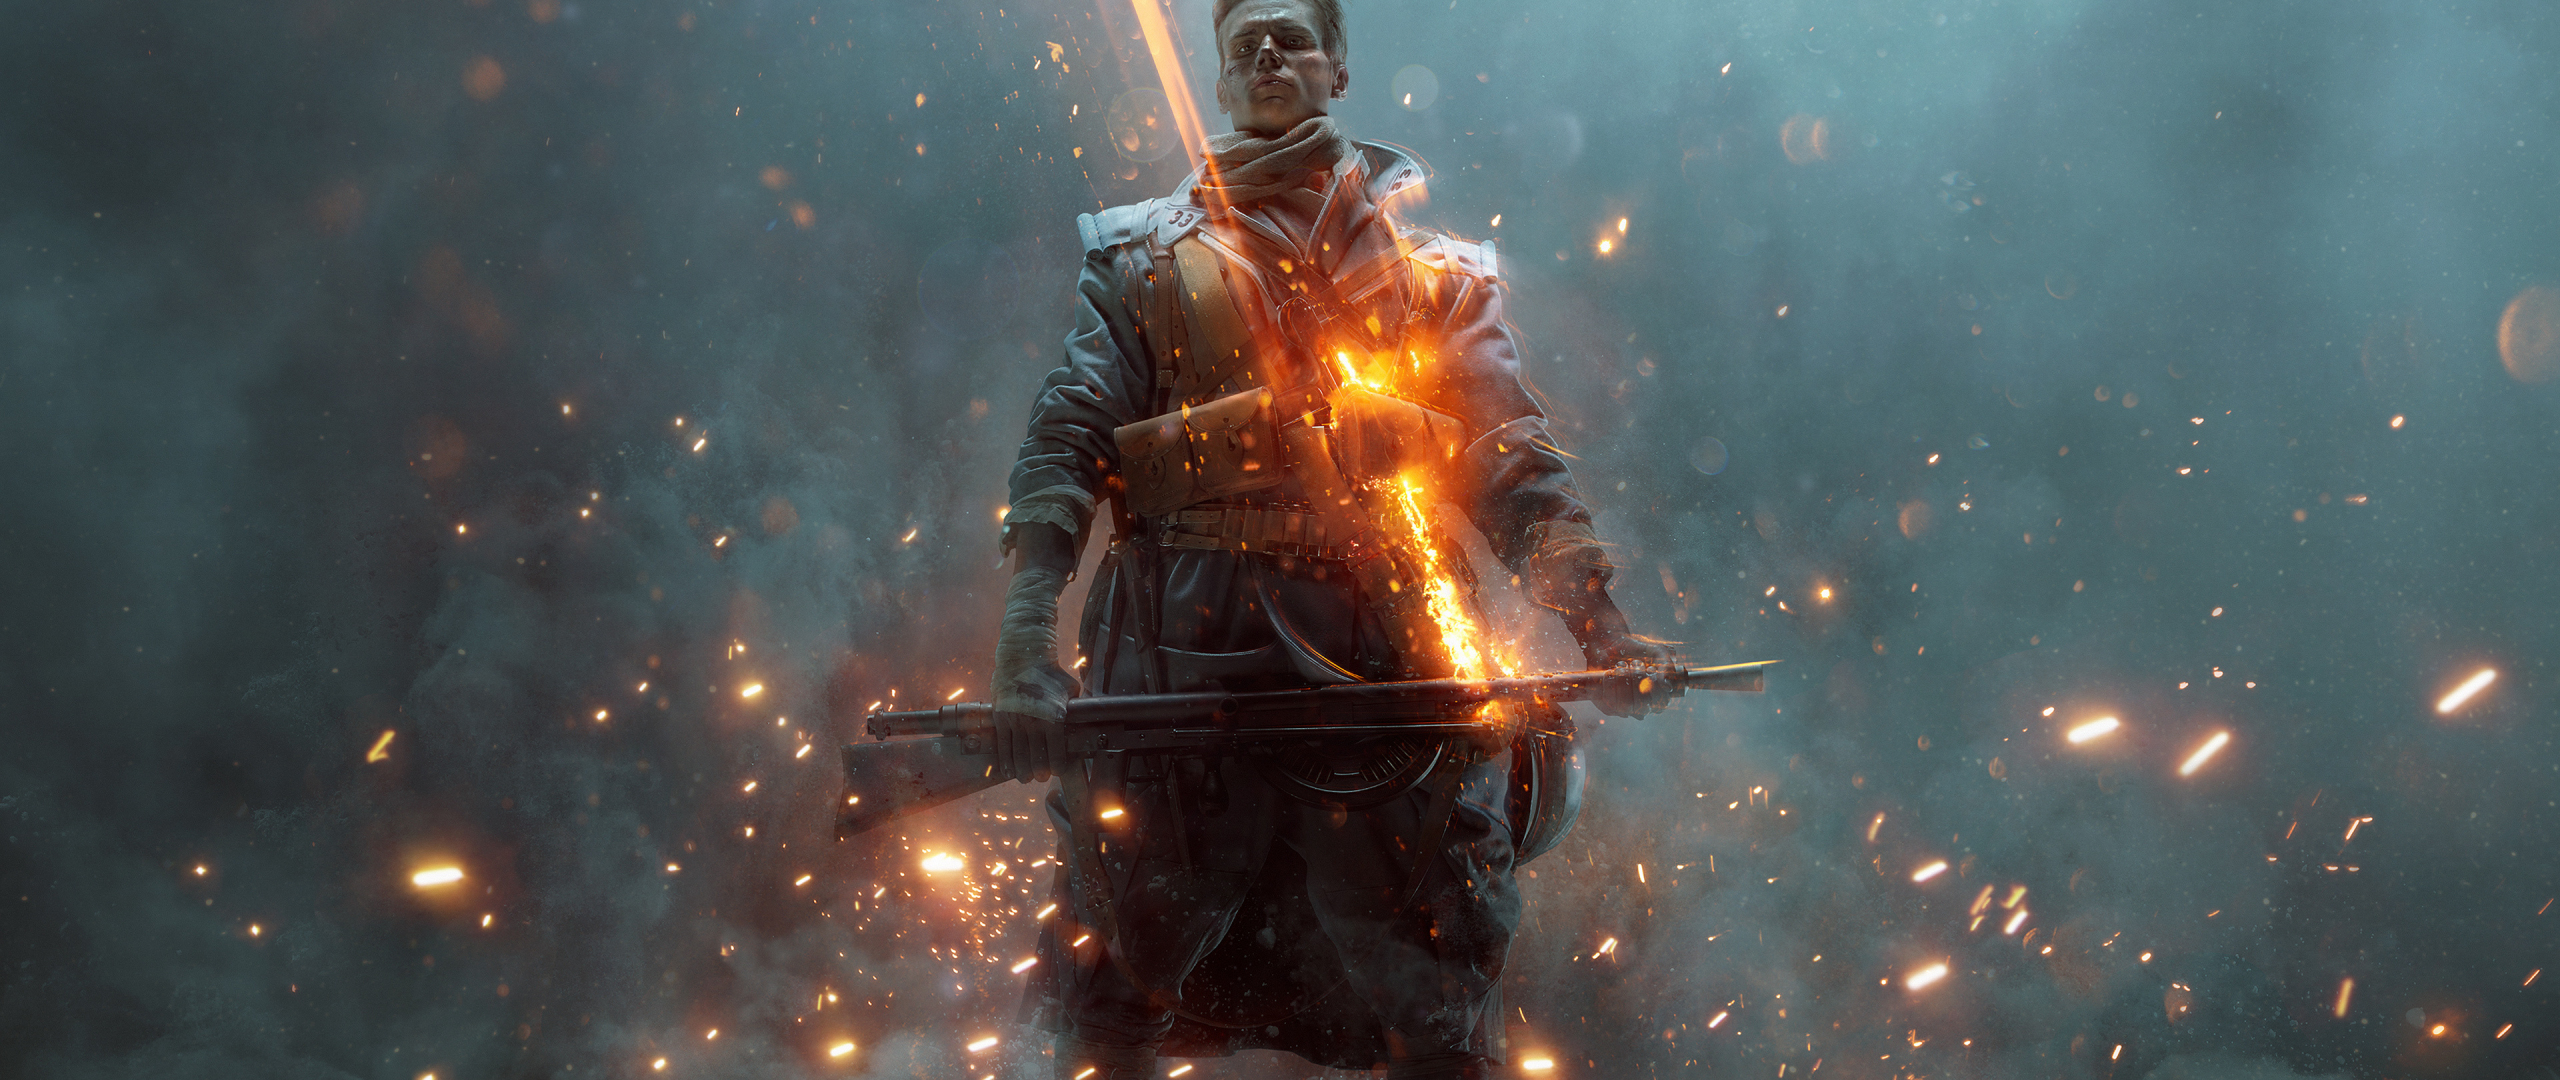 Battlefield 1, They Shall Not Pass, soldier, video game, 2017, 2560x1080 wallpaper